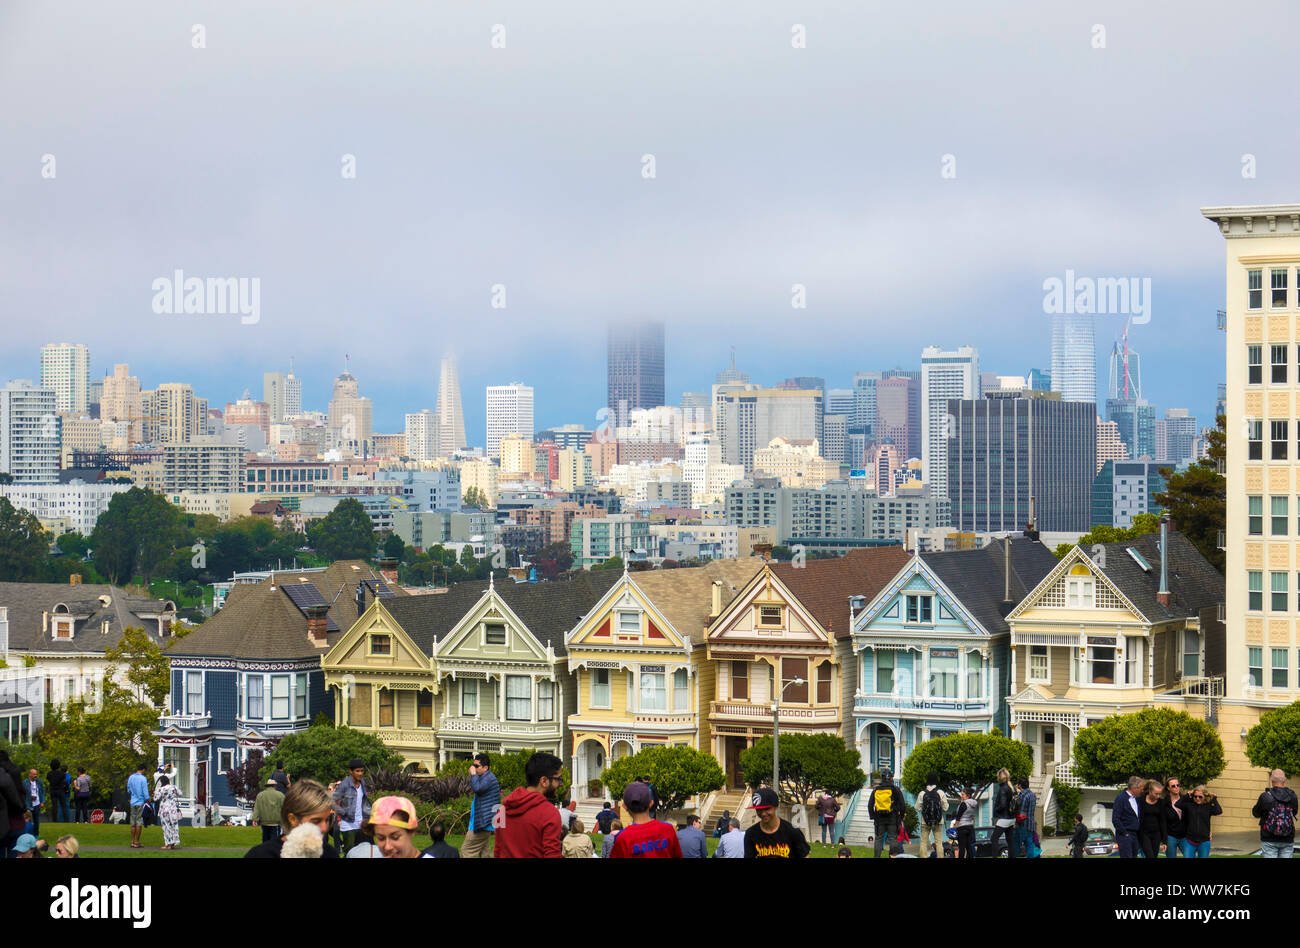 USA, California, San Francisco County, Painted Ladies houses in Steiner Street at the Alamo Square Park Stock Photo